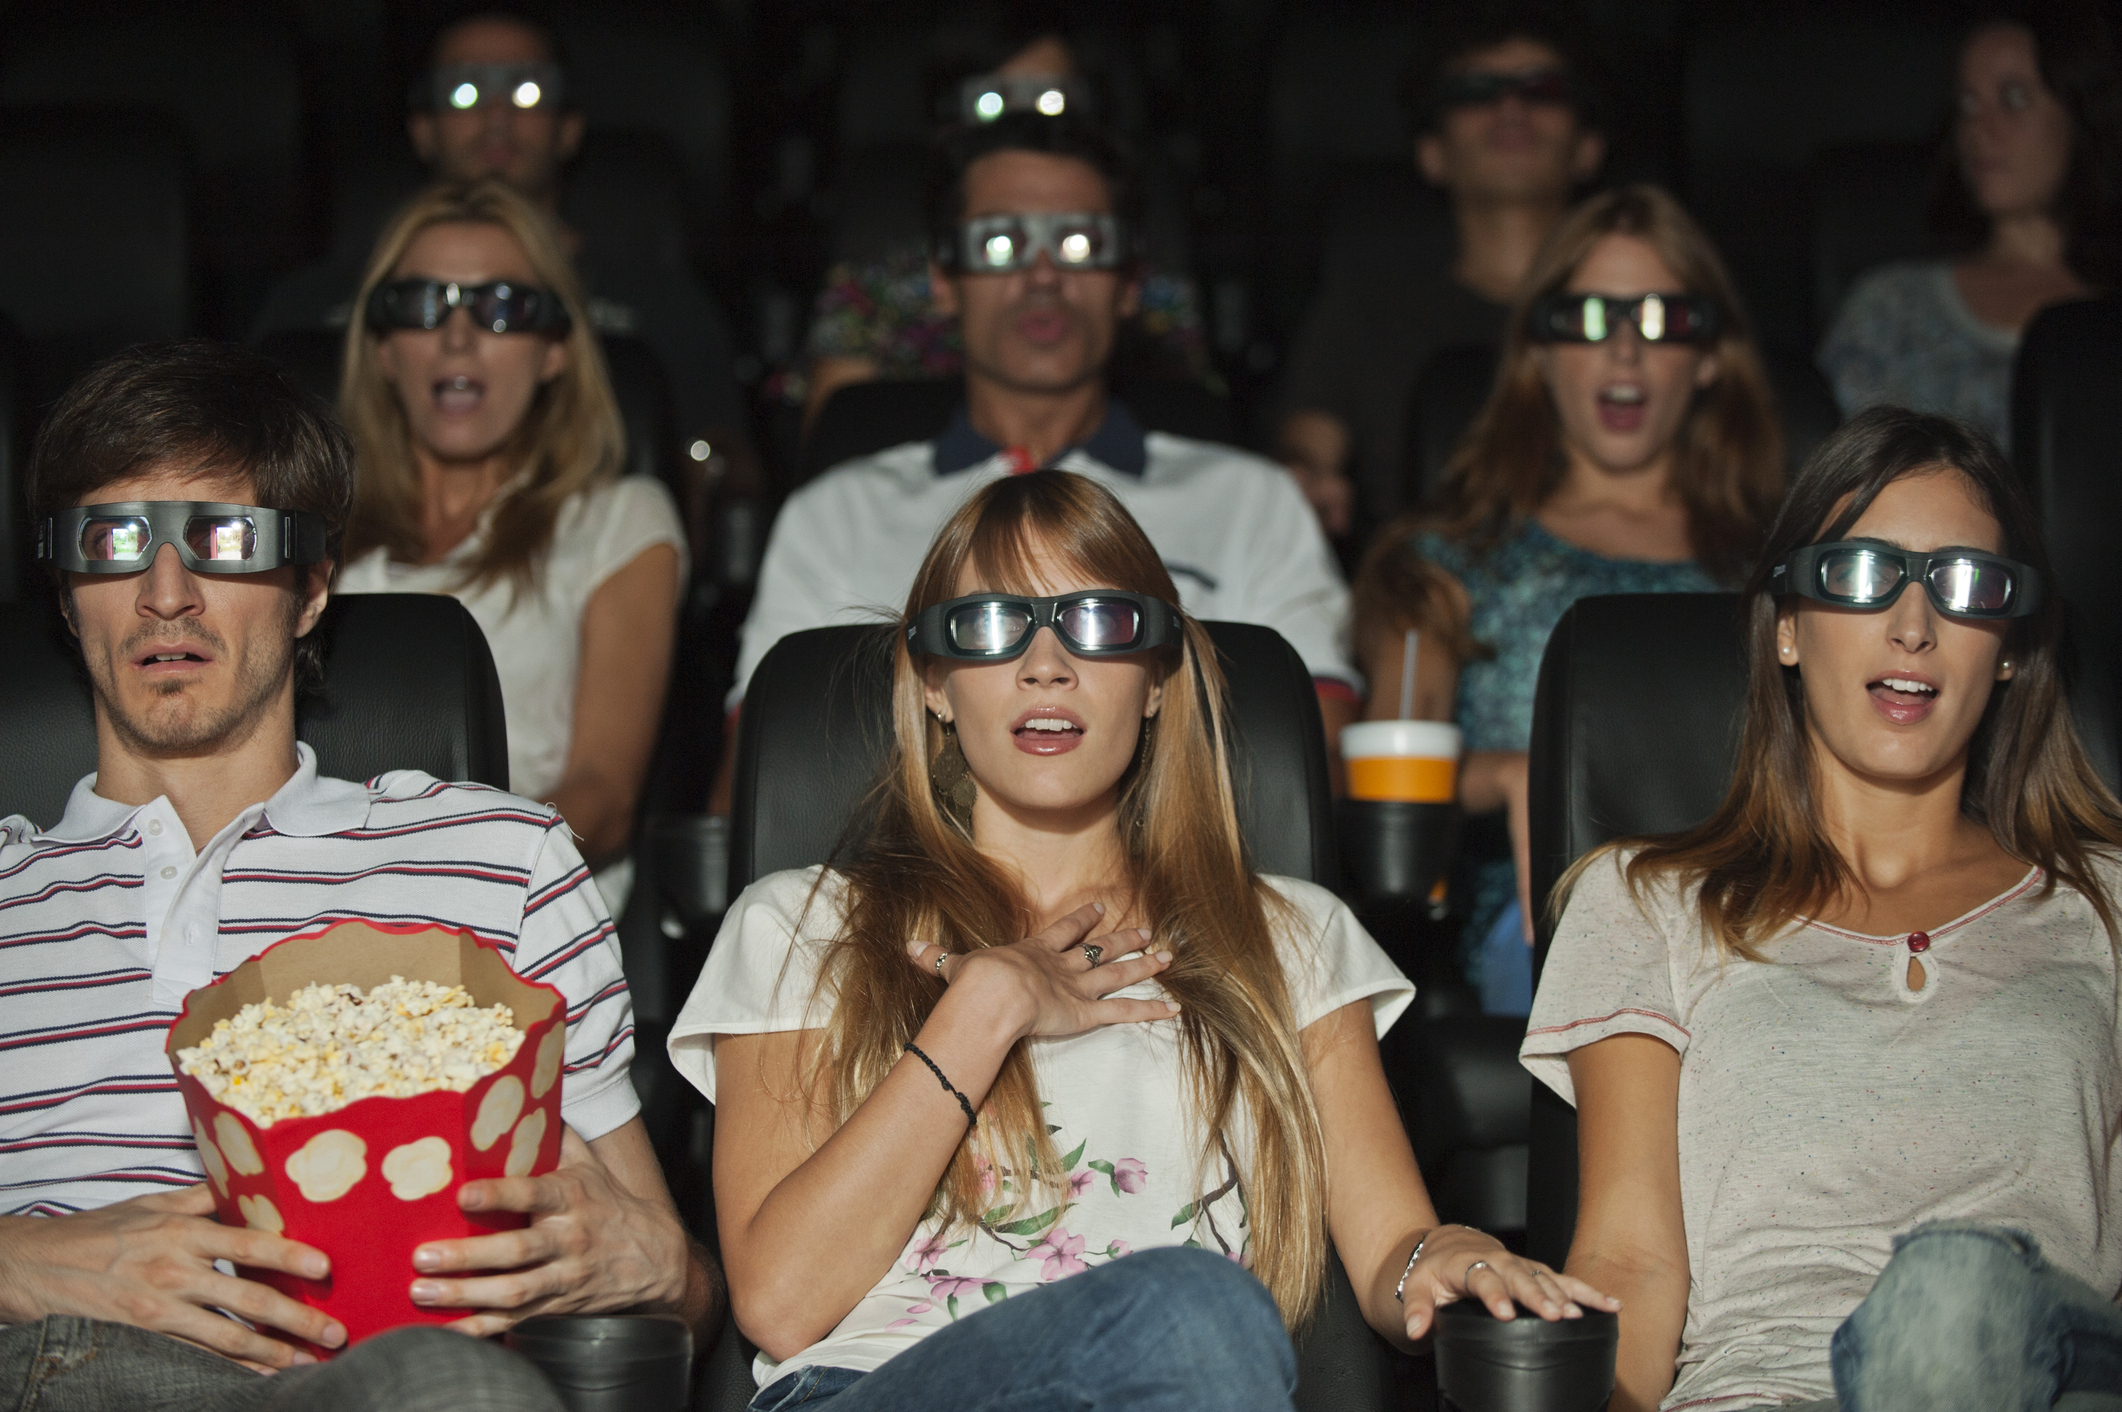 Audience in 3D glasses watching a movie, expressions of surprise, one holding popcorn